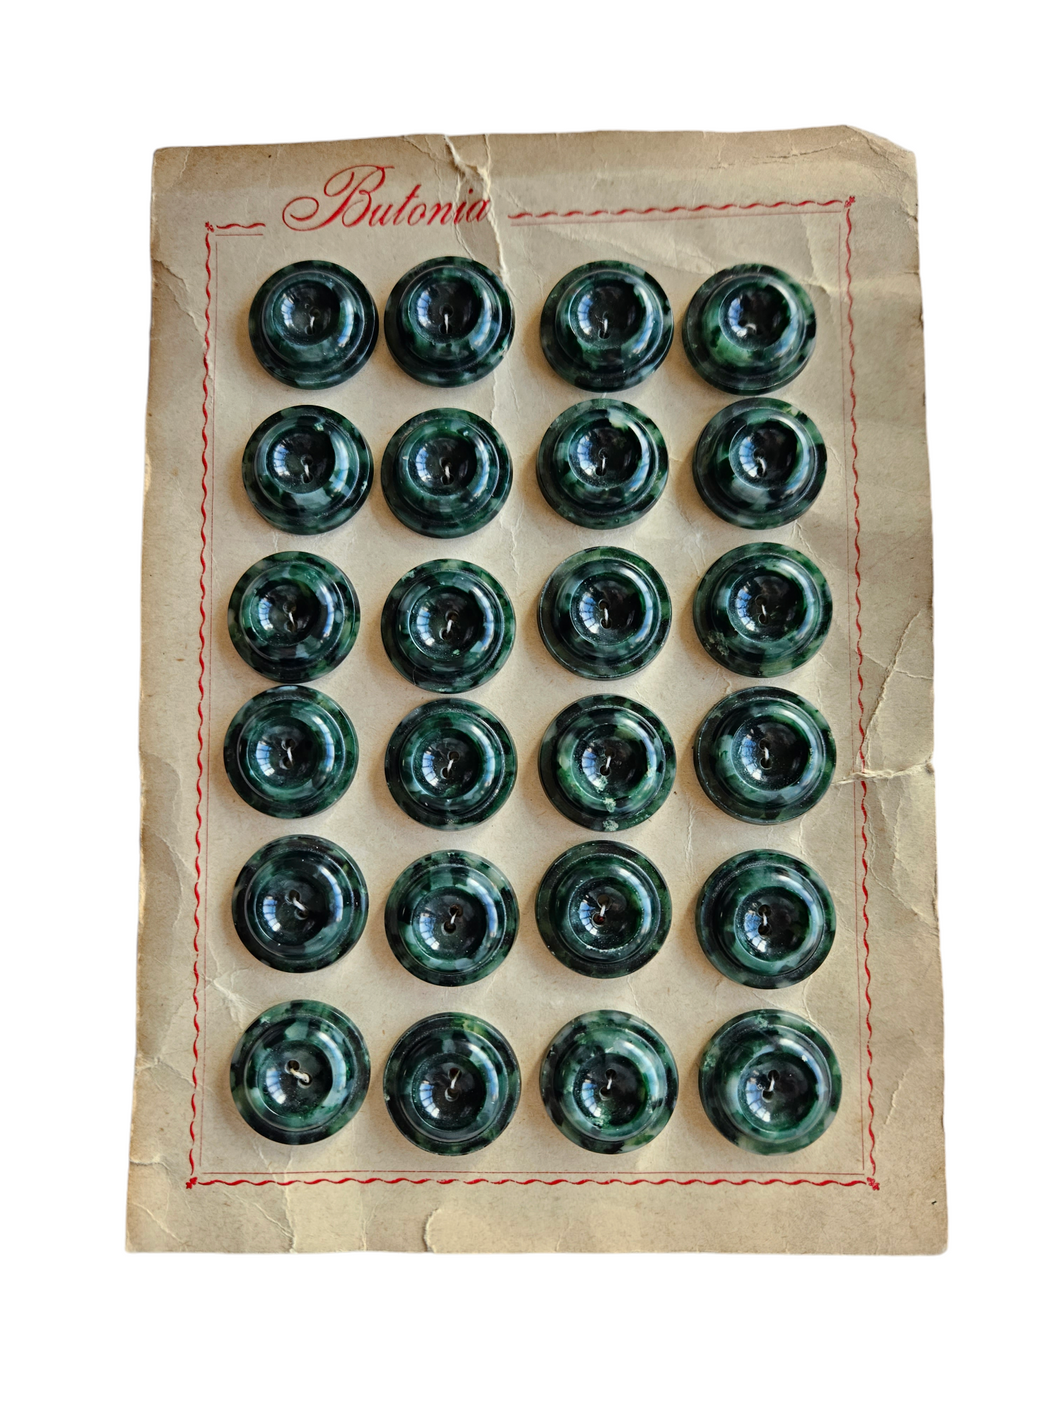 1940s Deadstock Carded Dark Green Marbled Buttons